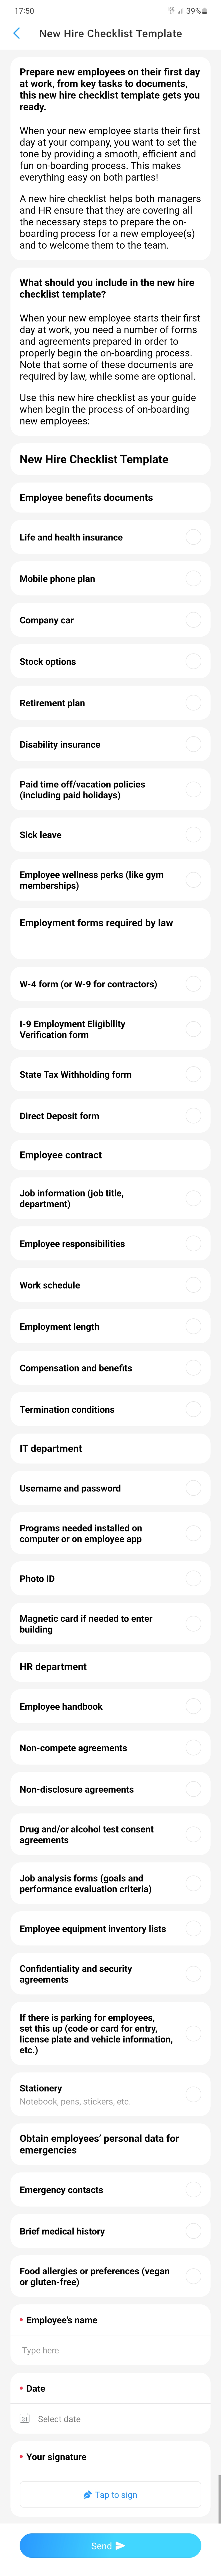 New hire checklist template-mobile view